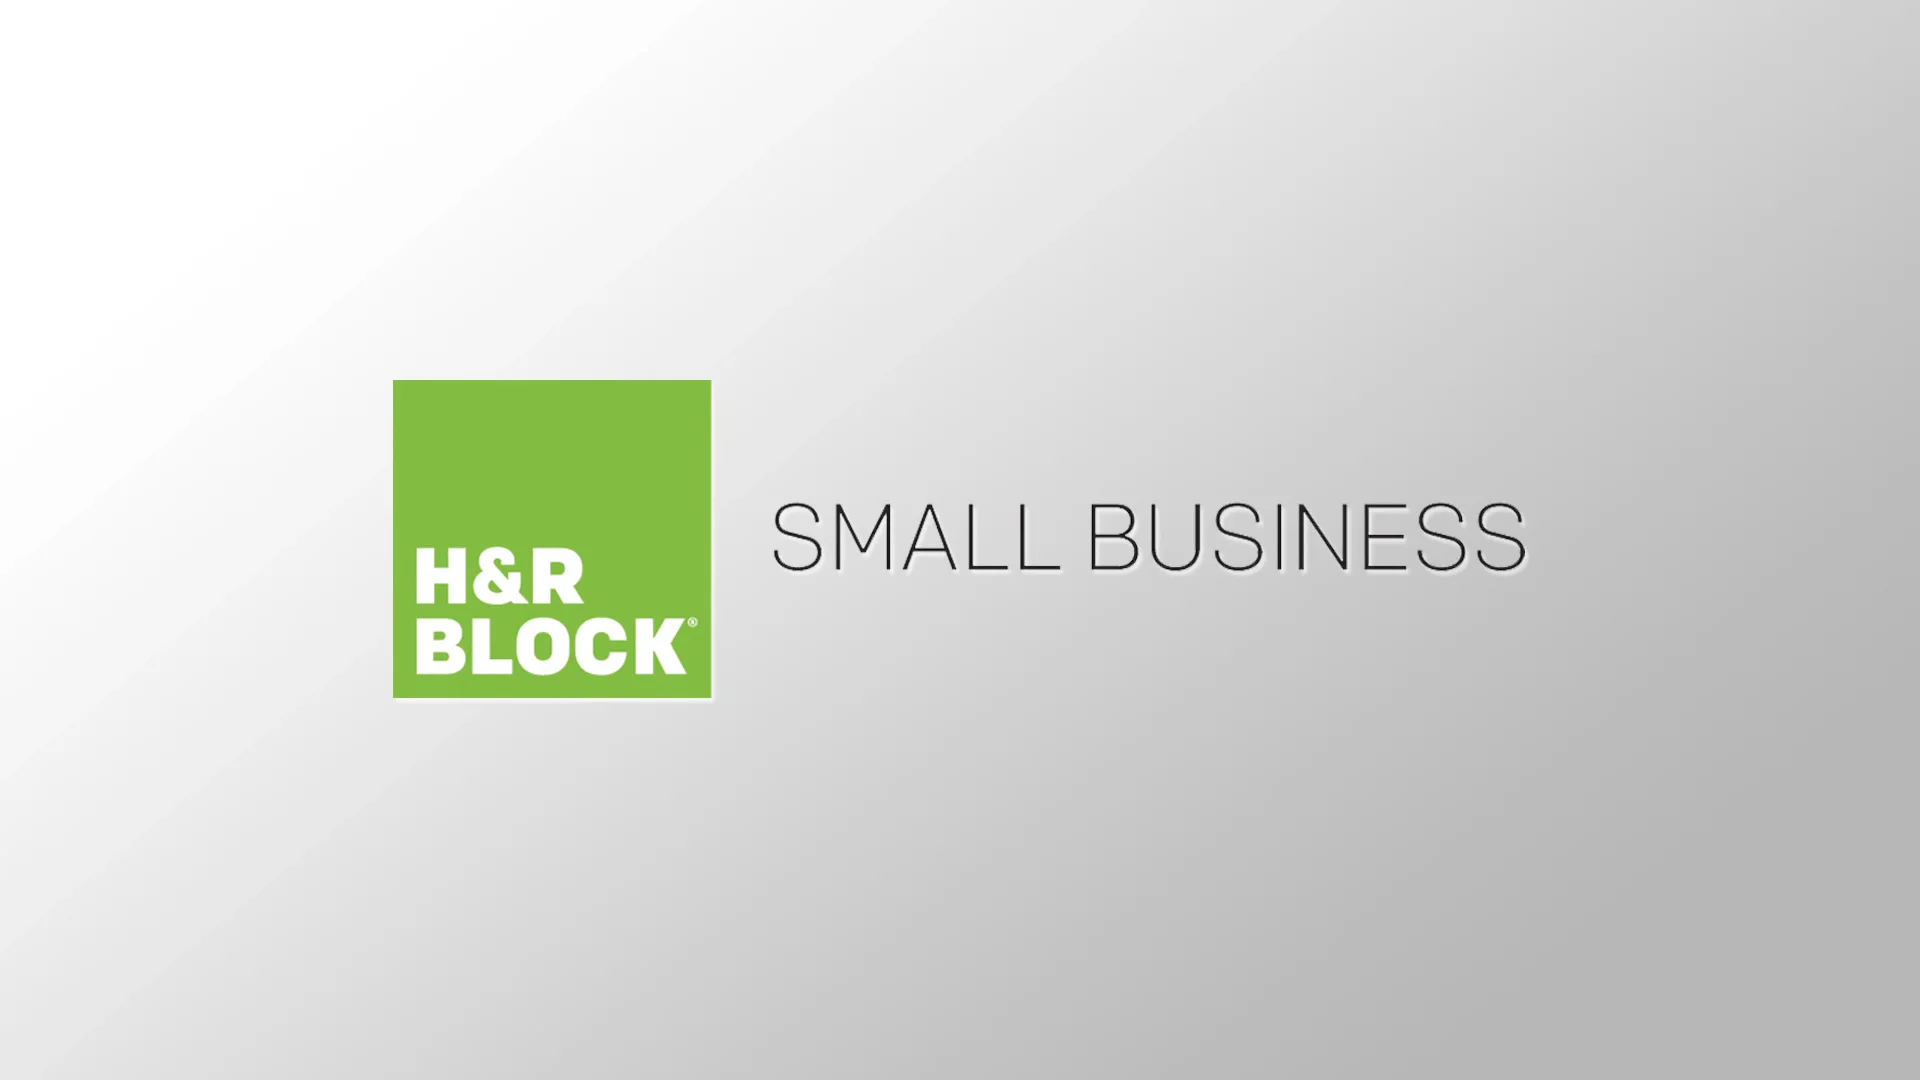 H&R Block Small Business on Vimeo